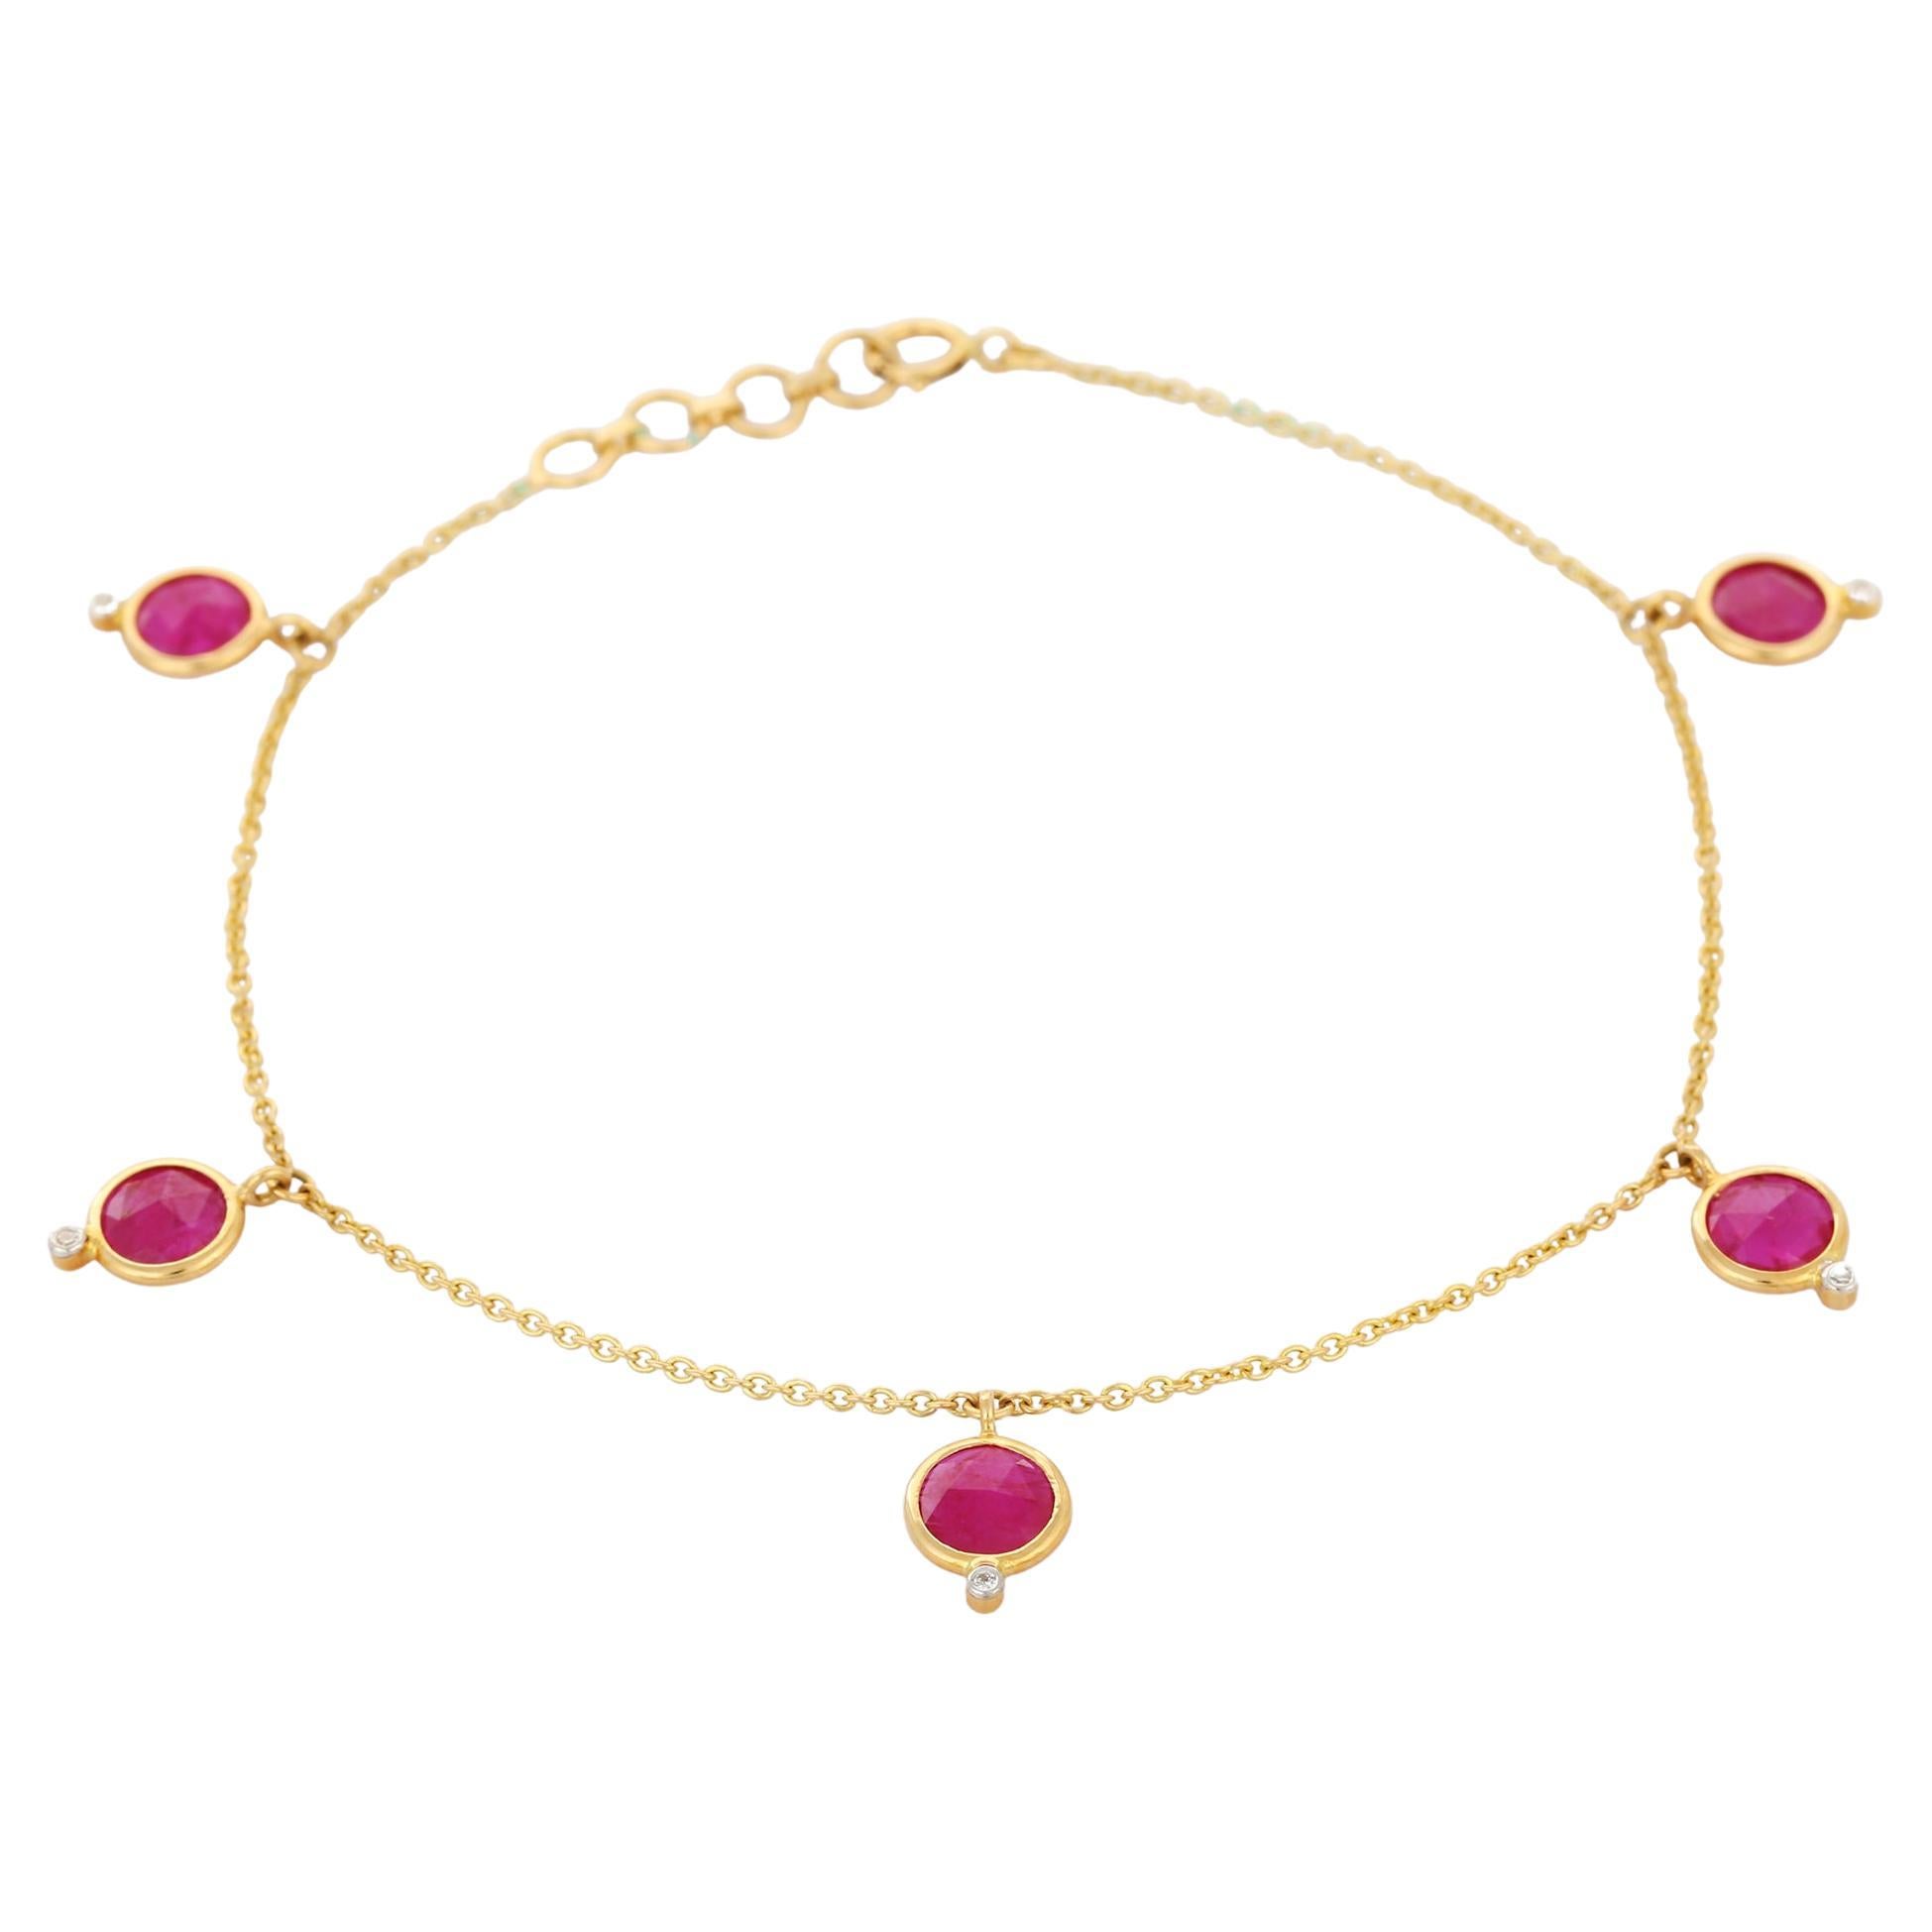 18K Yellow Gold Chain Bracelet with Dangling Ruby Diamond Charm For Sale